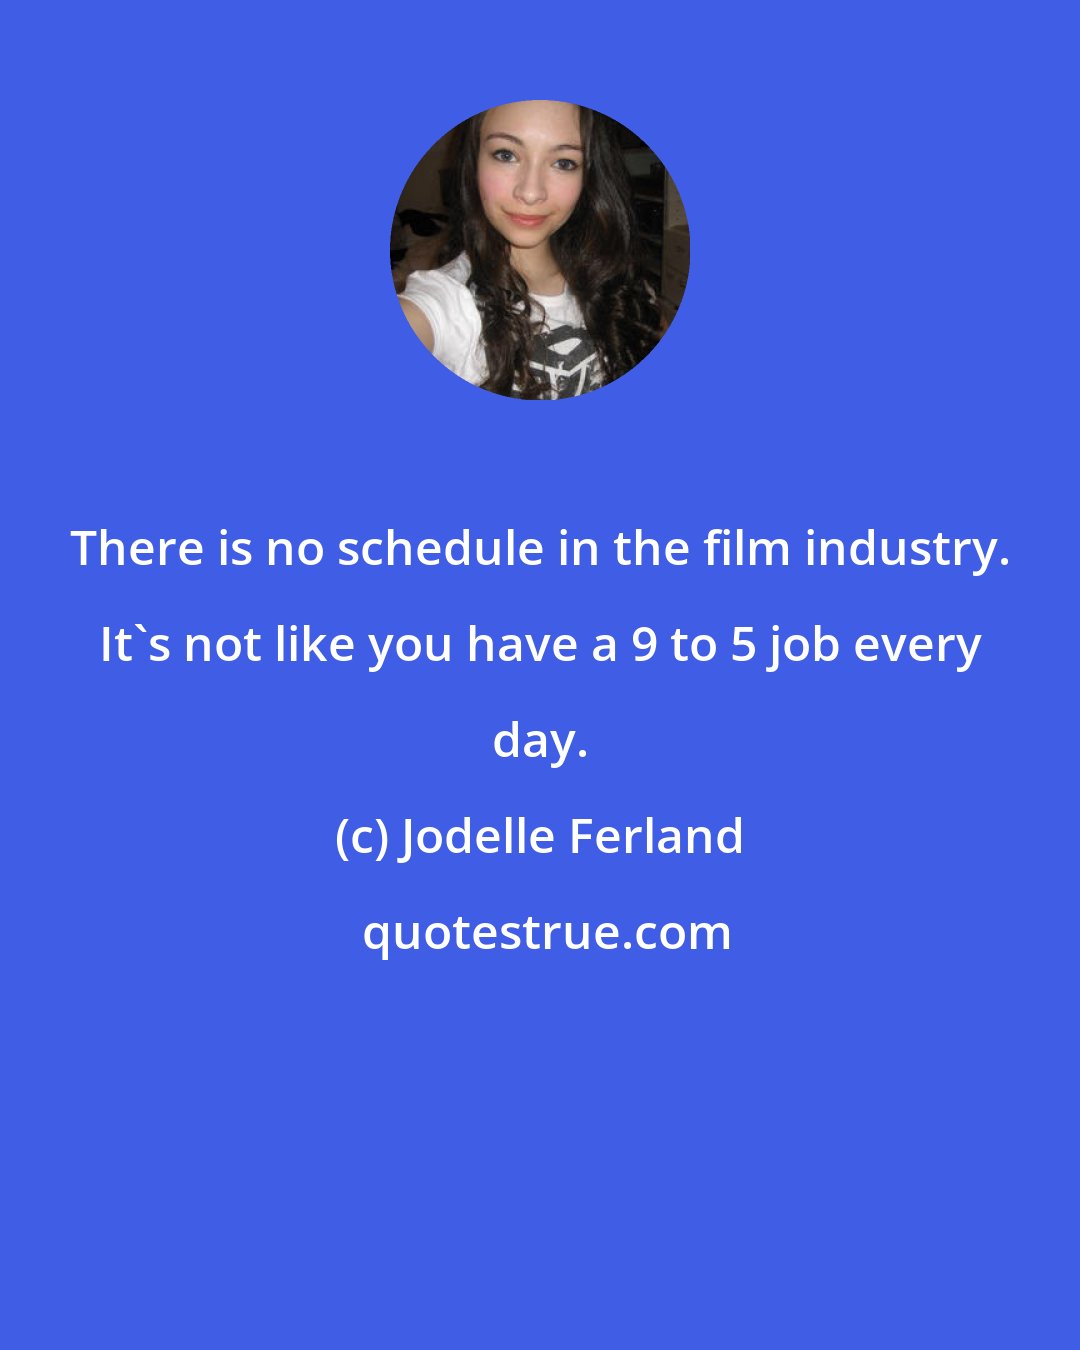 Jodelle Ferland: There is no schedule in the film industry. It's not like you have a 9 to 5 job every day.